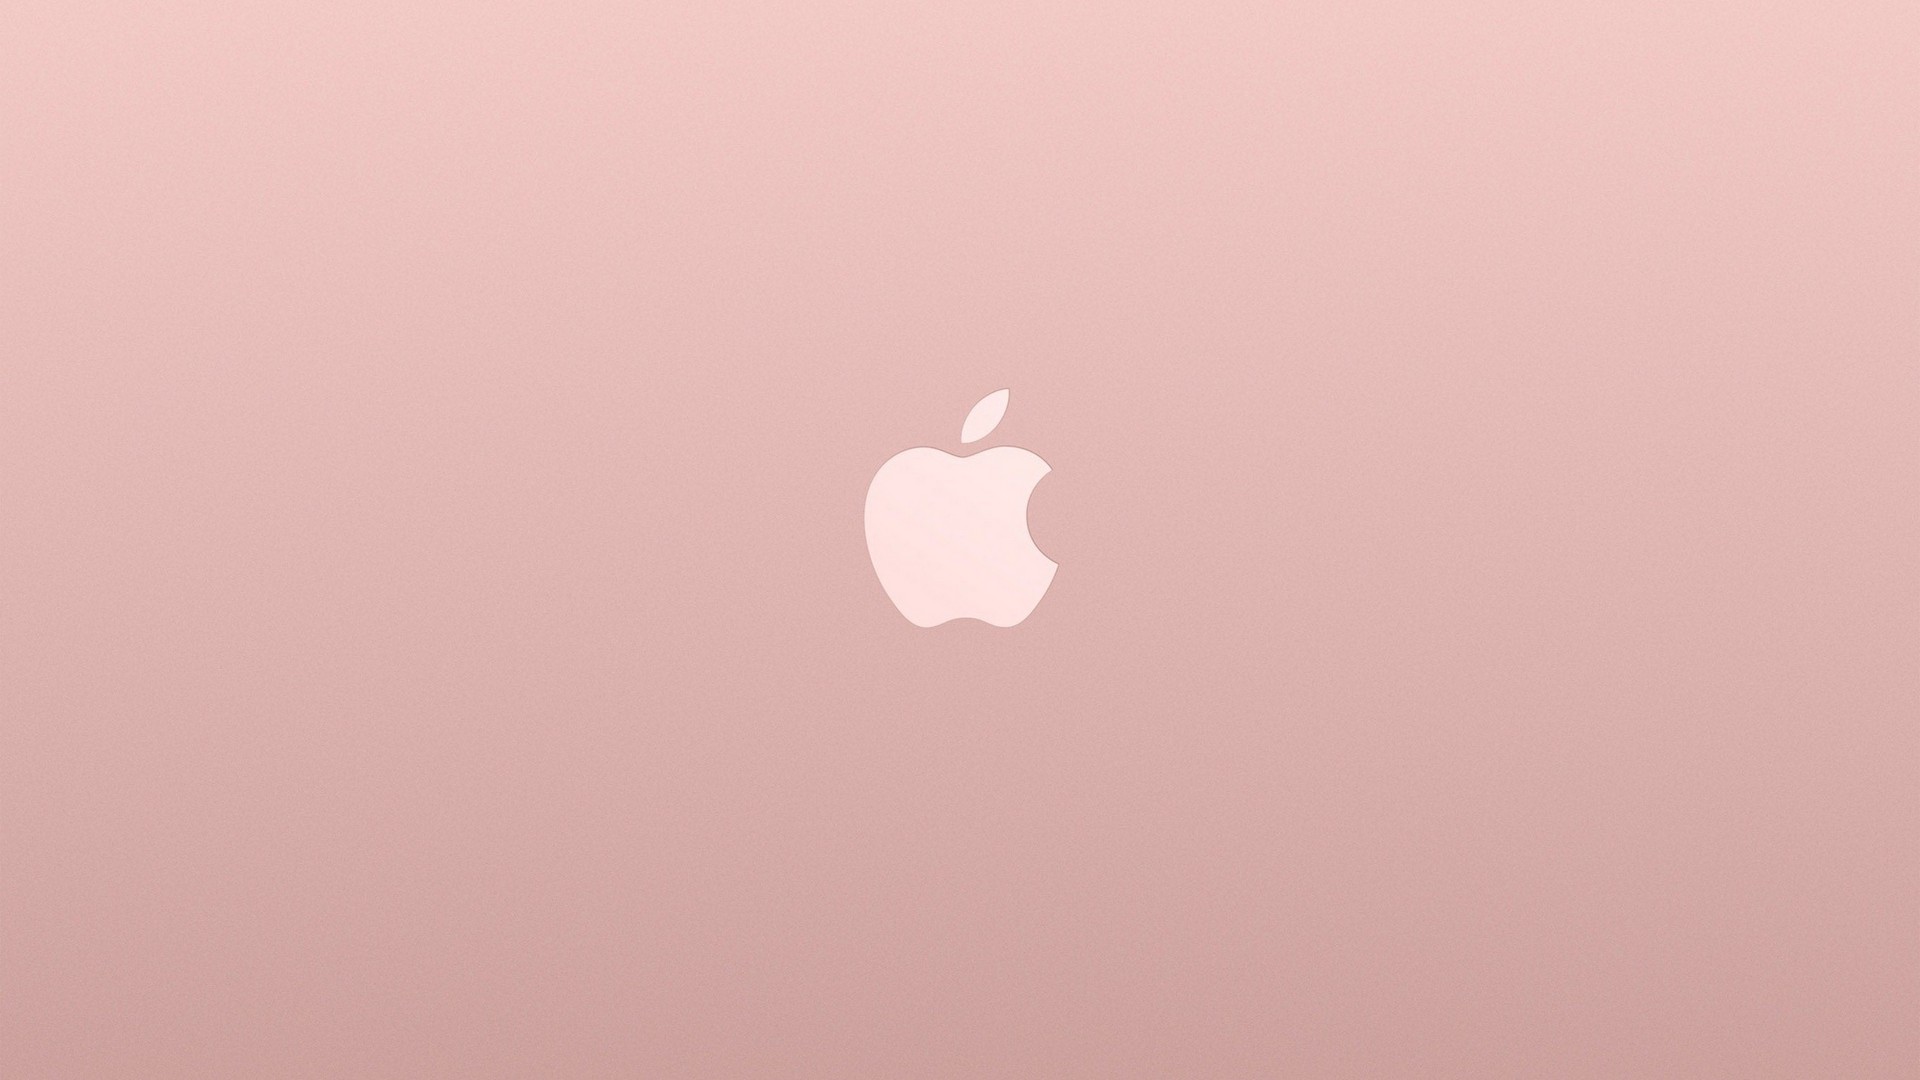 Rose Gold HD Backgrounds 1920x1080